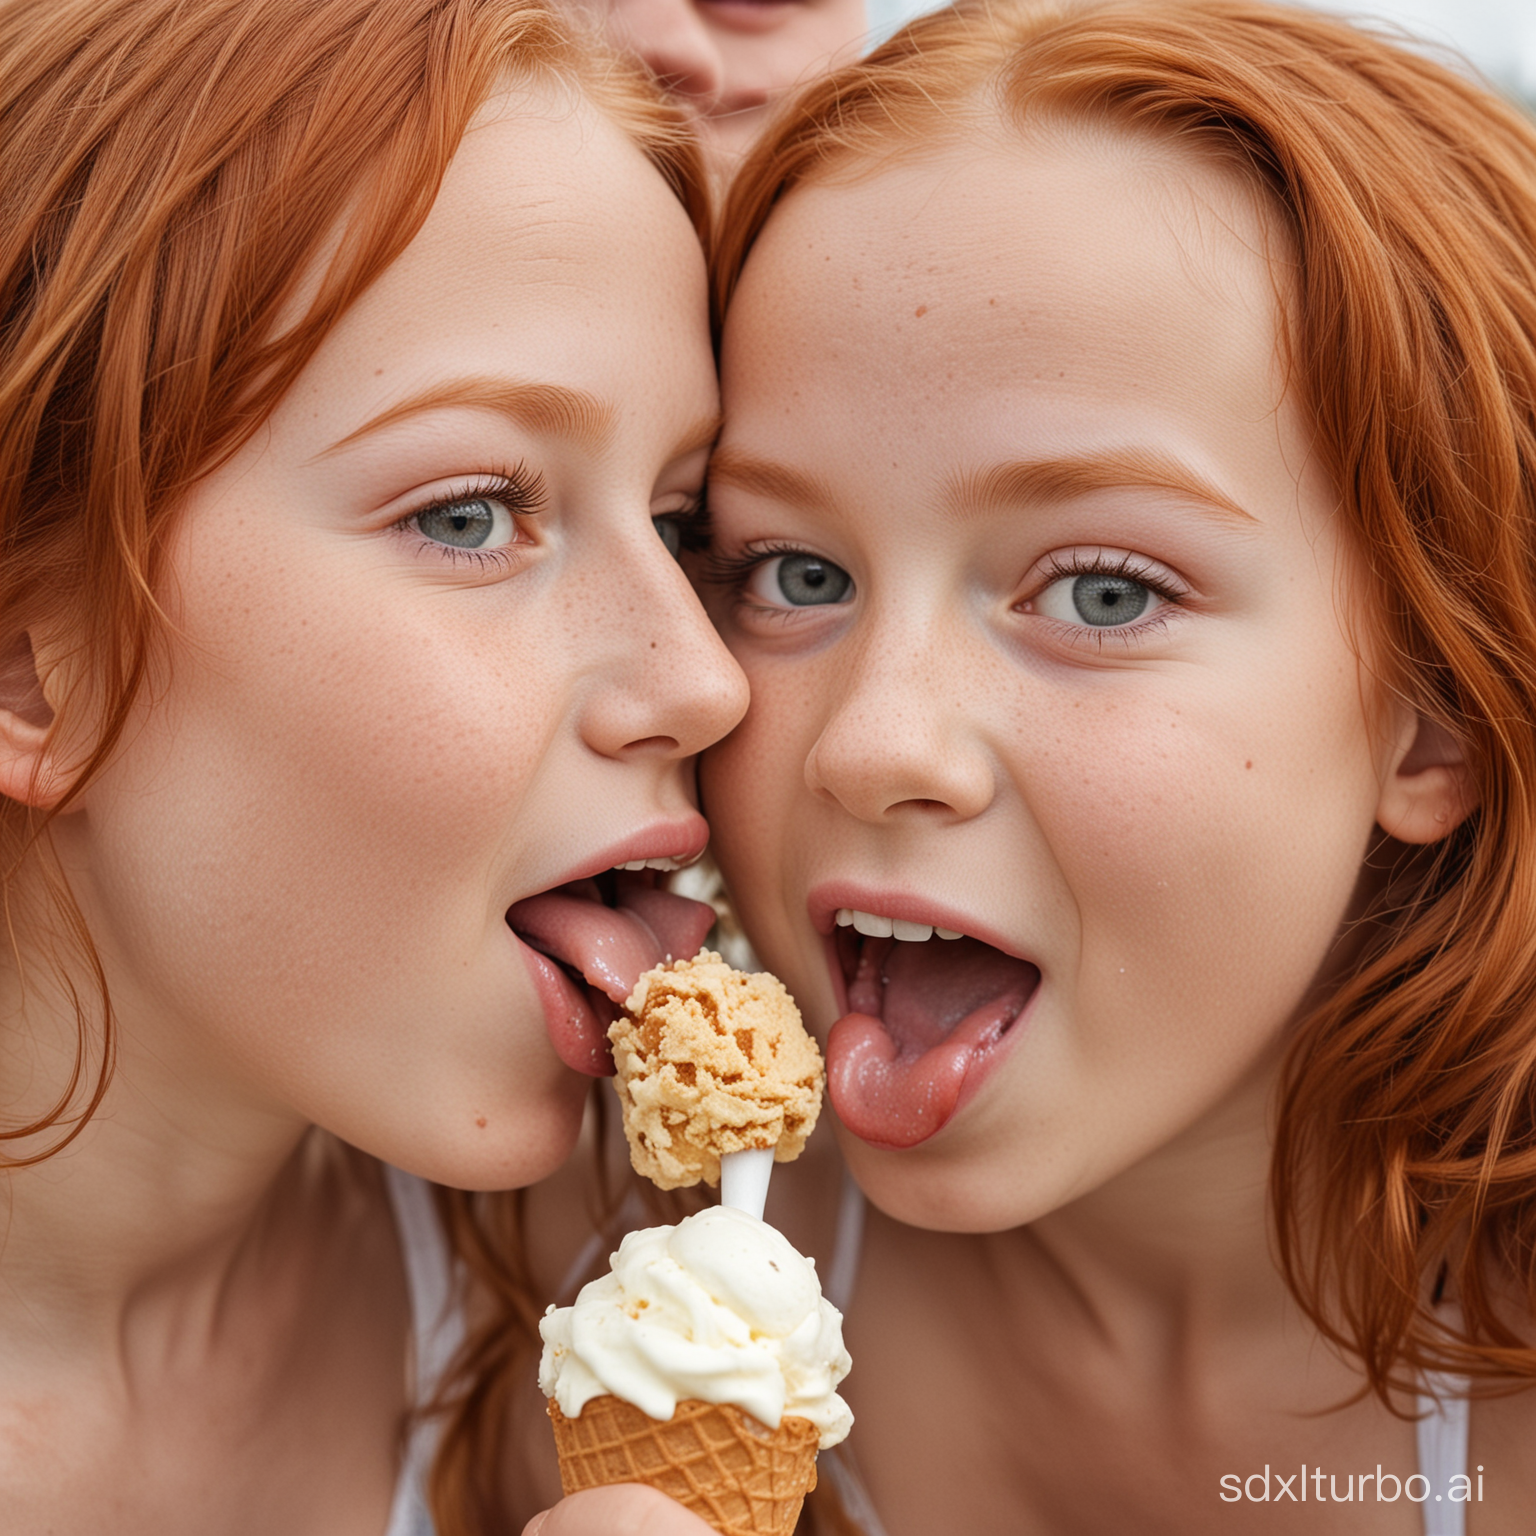 a photography of 2 young  children's girls redhead in bikini, close-up mid of camera, 1 suck ice cream showing the tongue and other young children kisses on the cheek